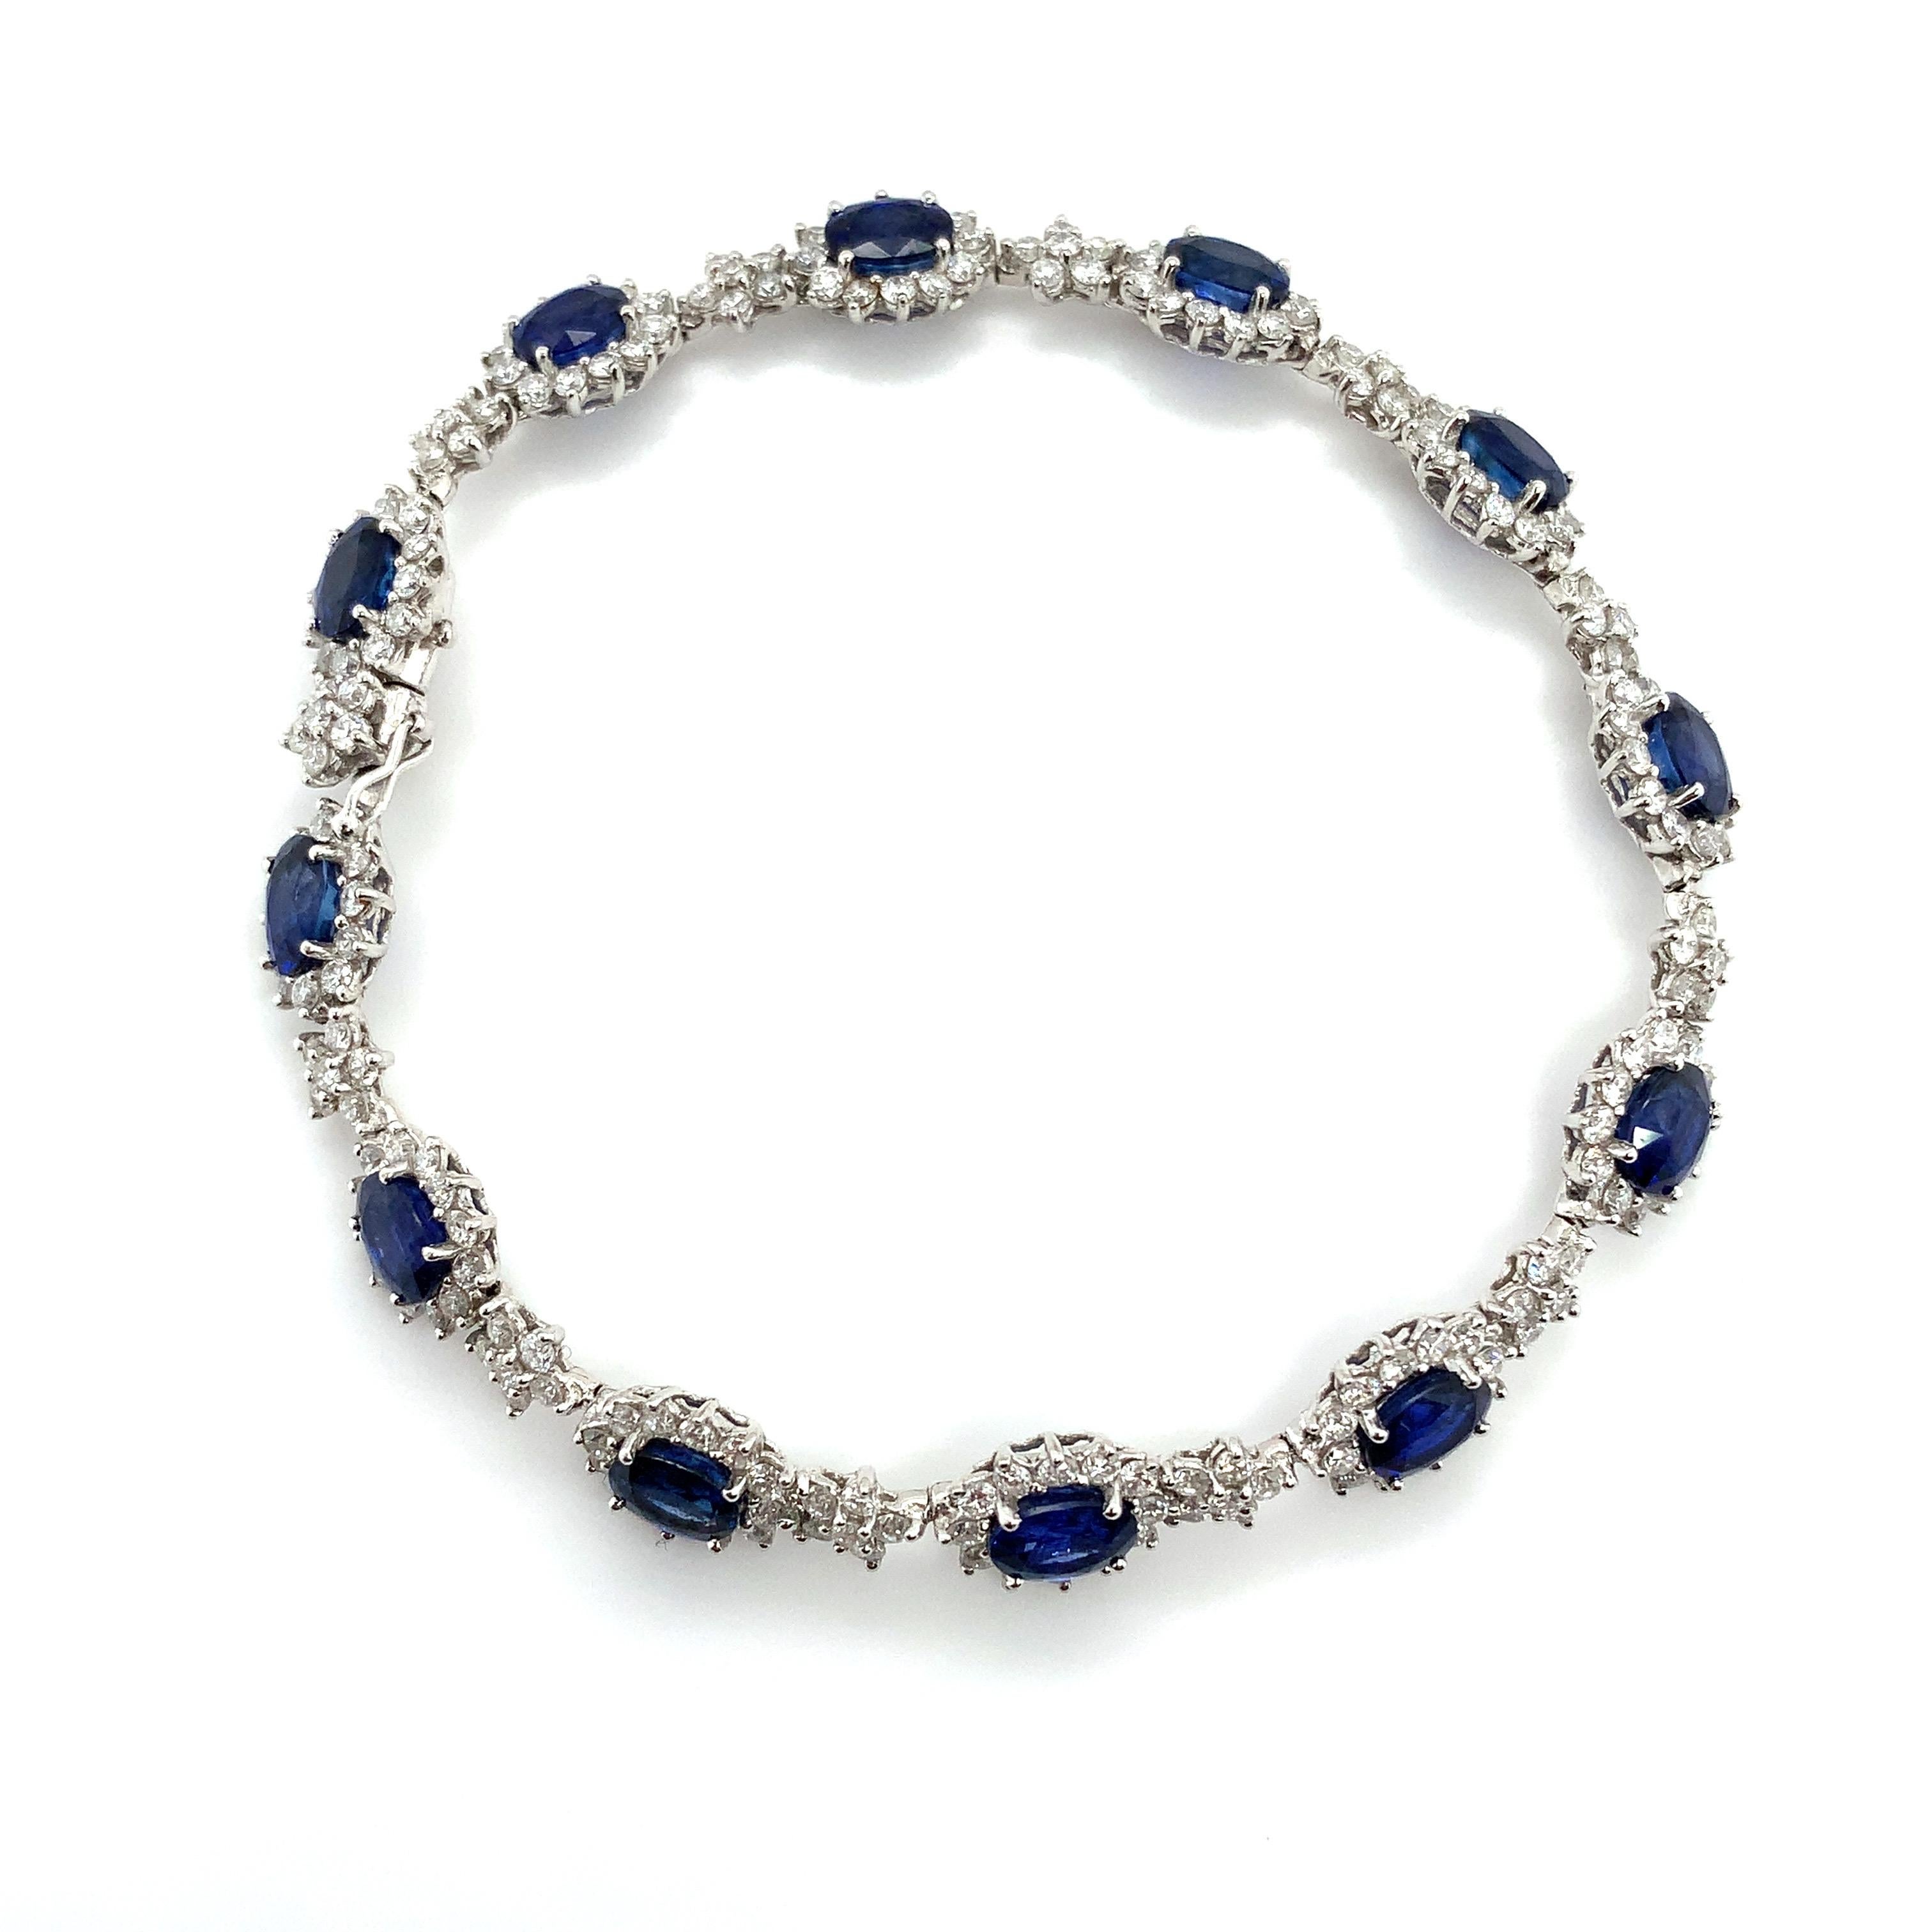 11.39ct Blue sapphire and diamond halo bracelet in 18k white gold.
Composed of oval-cut sapphires and accented by round brilliant-cut diamonds.
Beautiful duet blue Ceylon sapphire oval cut and sparkling round brilliant diamonds halo eternity